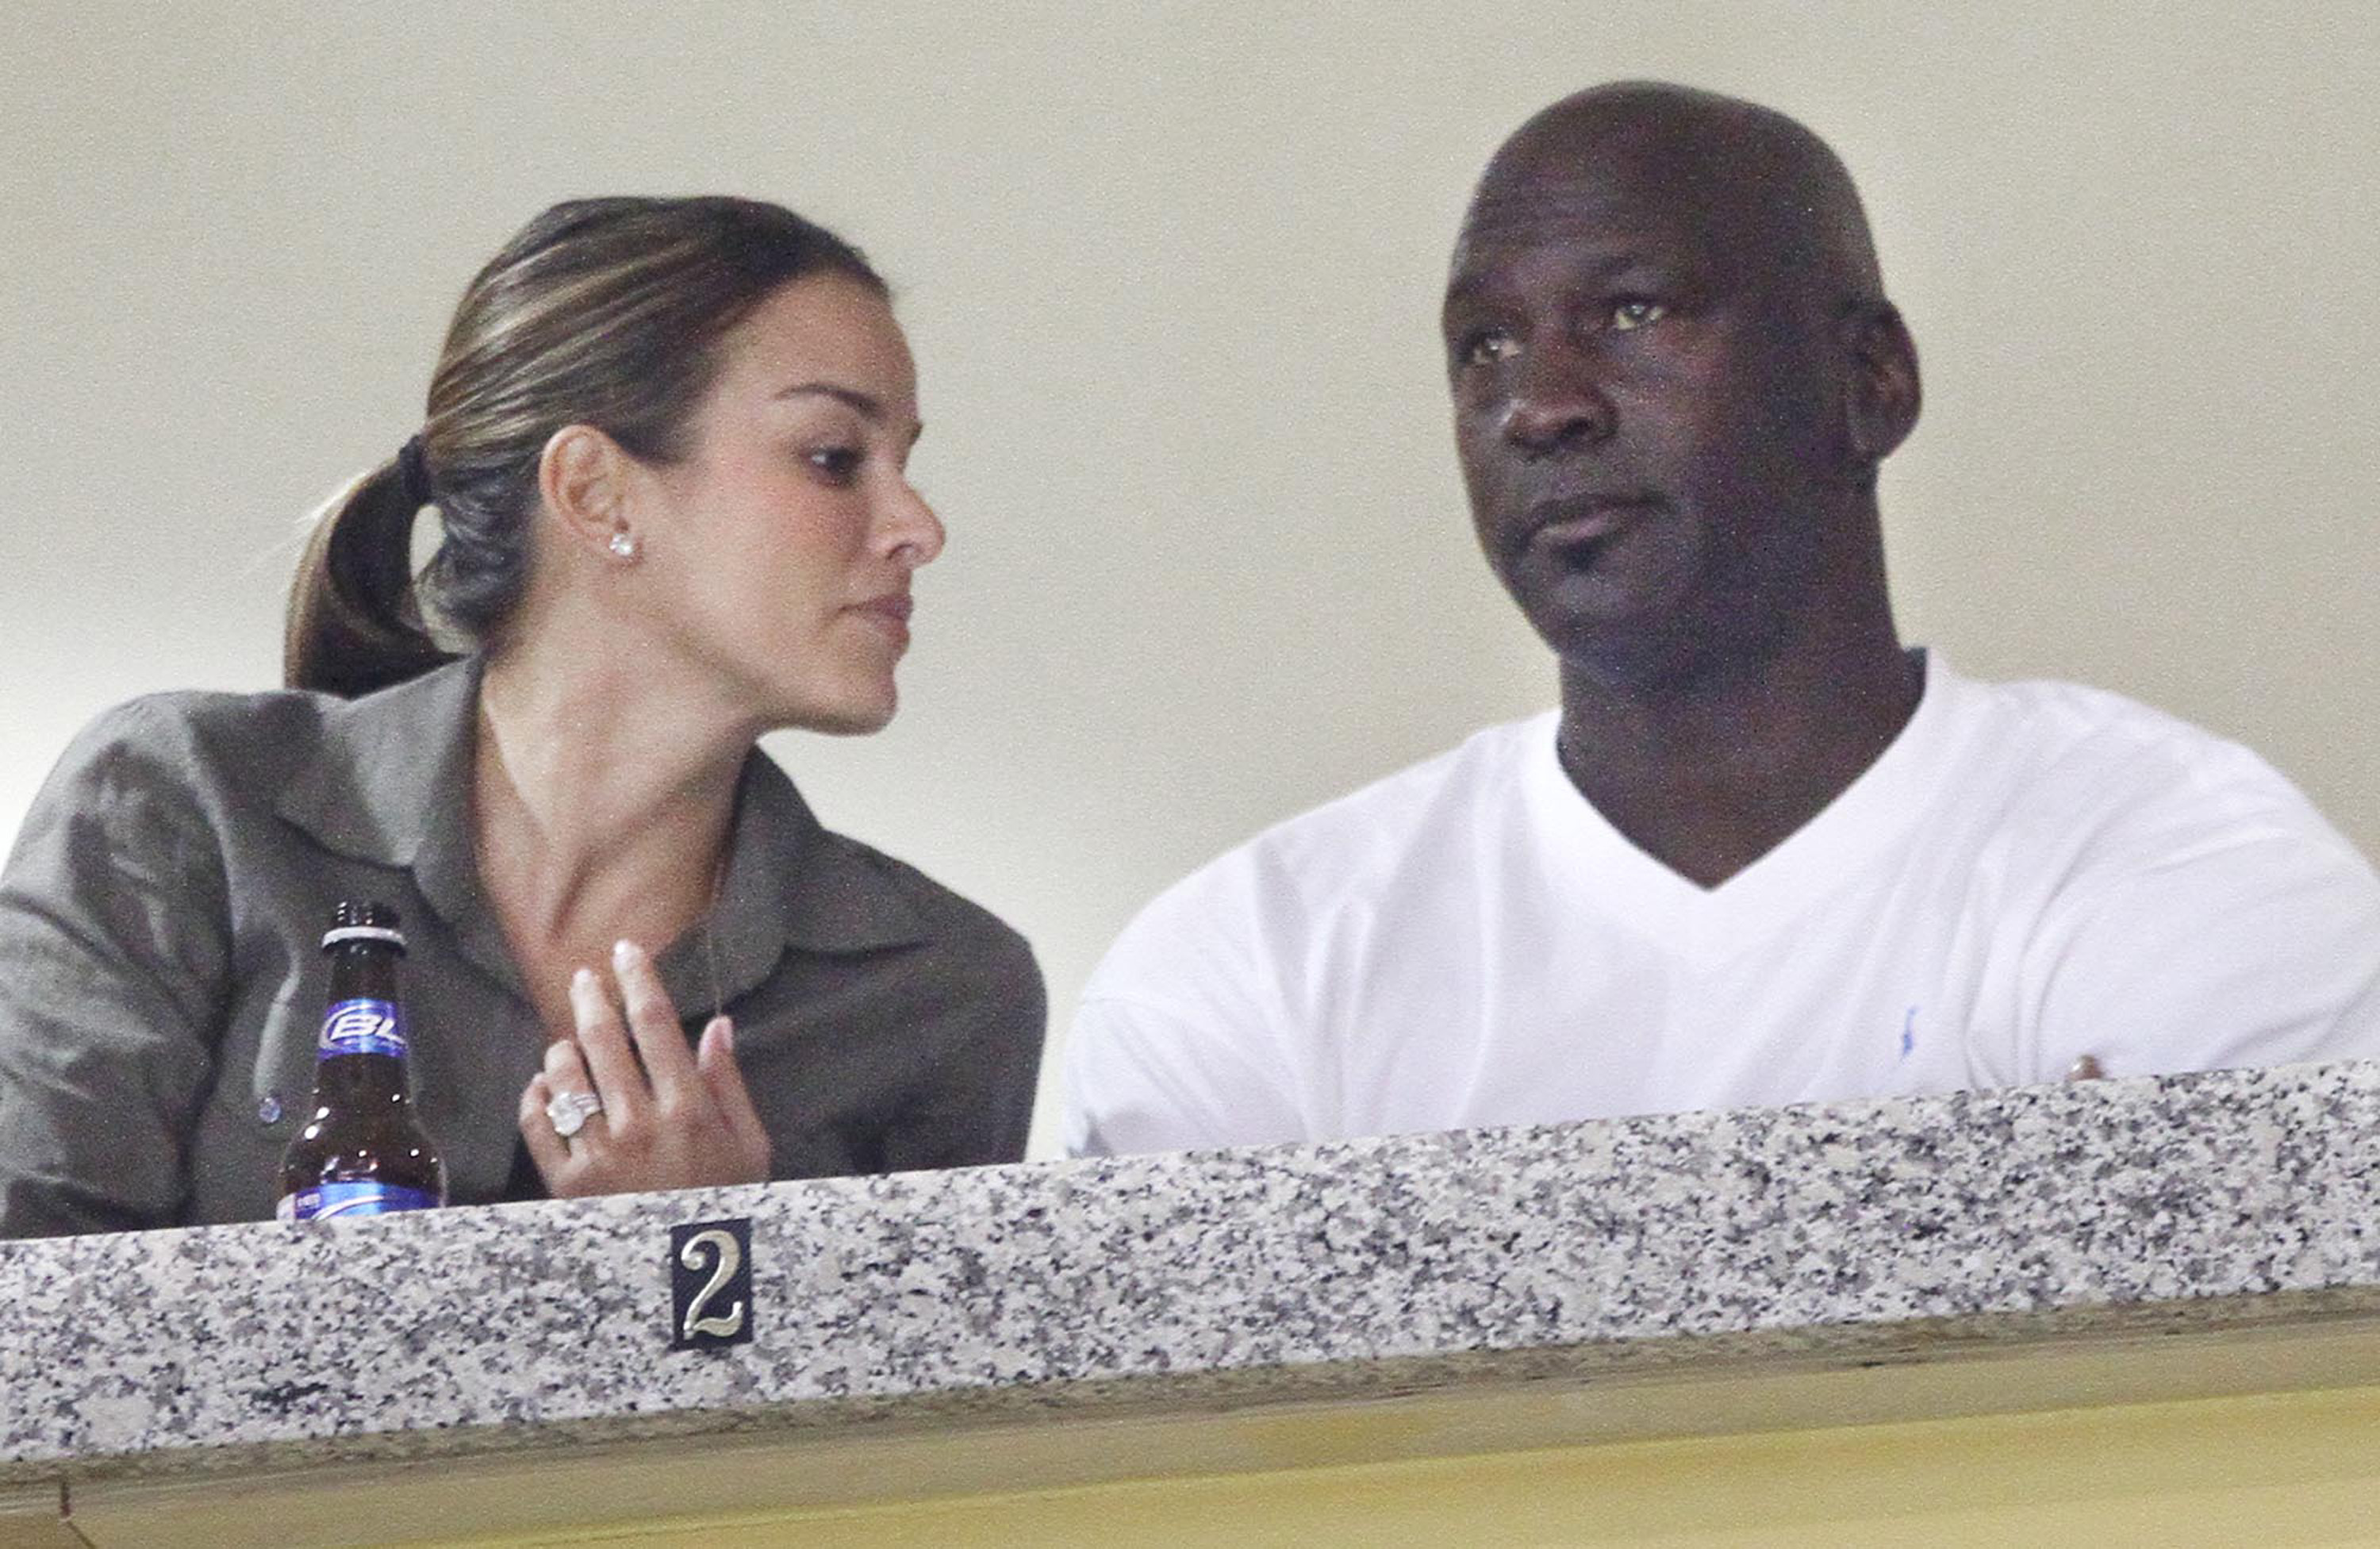 Michael Jordan and Yvette Prieto at the UCF Arena in Orlando, Florida on February 8, 2012 | Source: Getty Images